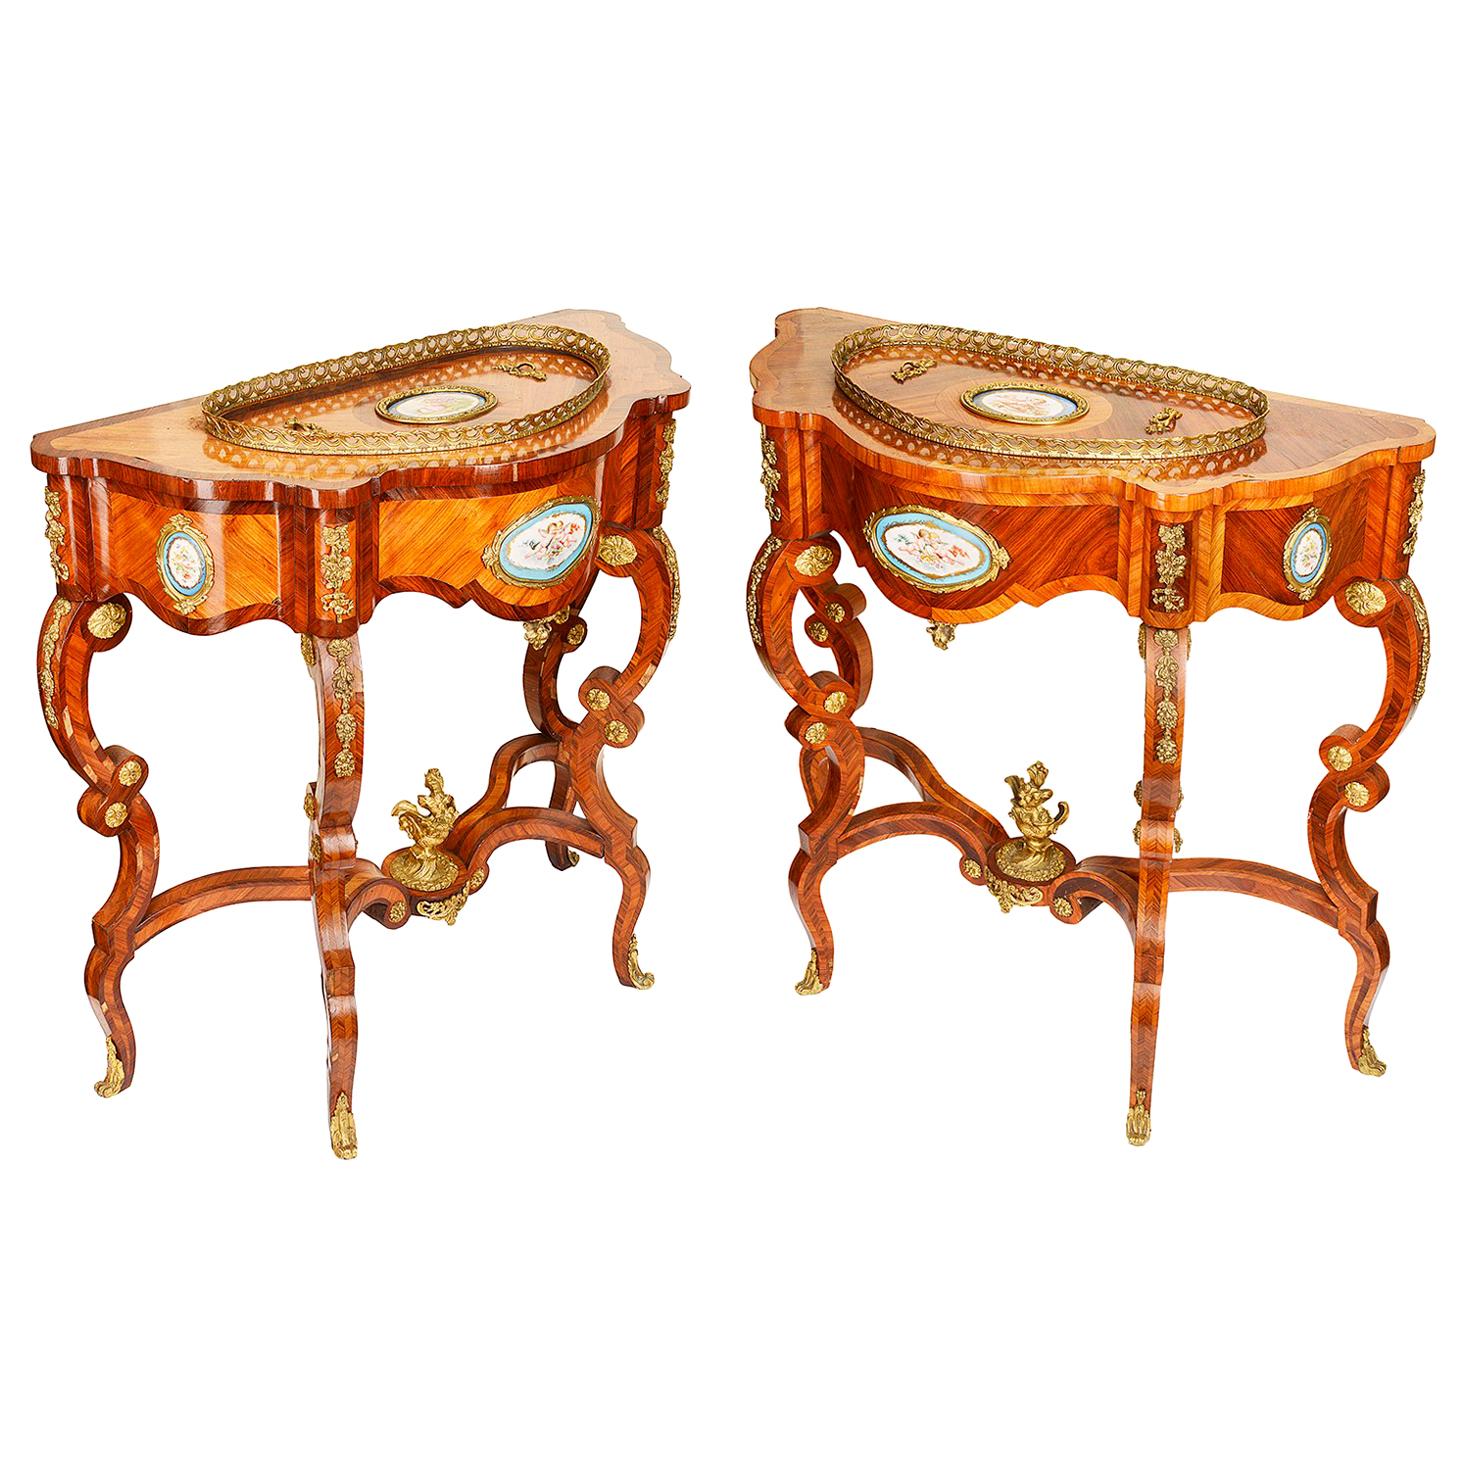 Pair of 19th Century French Console or Jardinière Tables